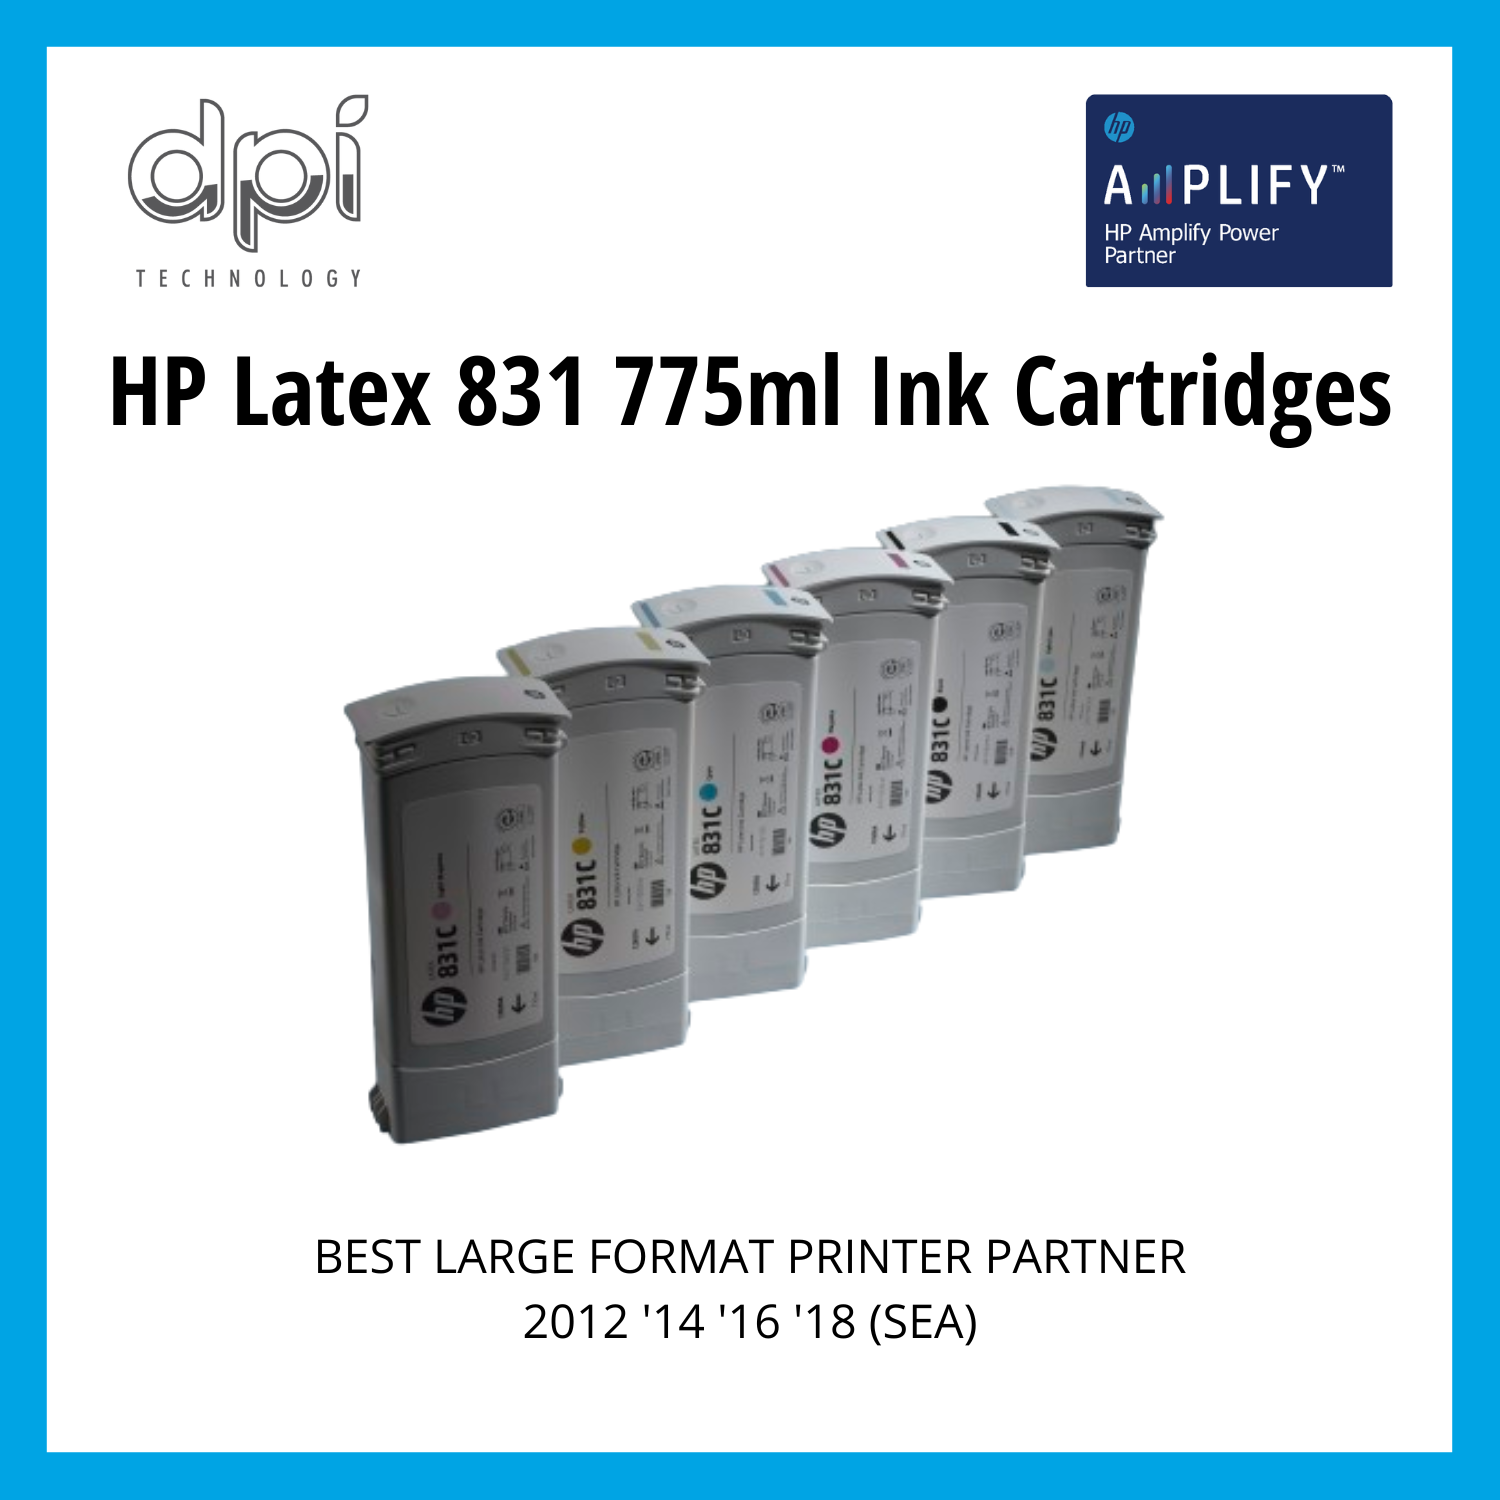 HP Latex 831 Ink Consumables